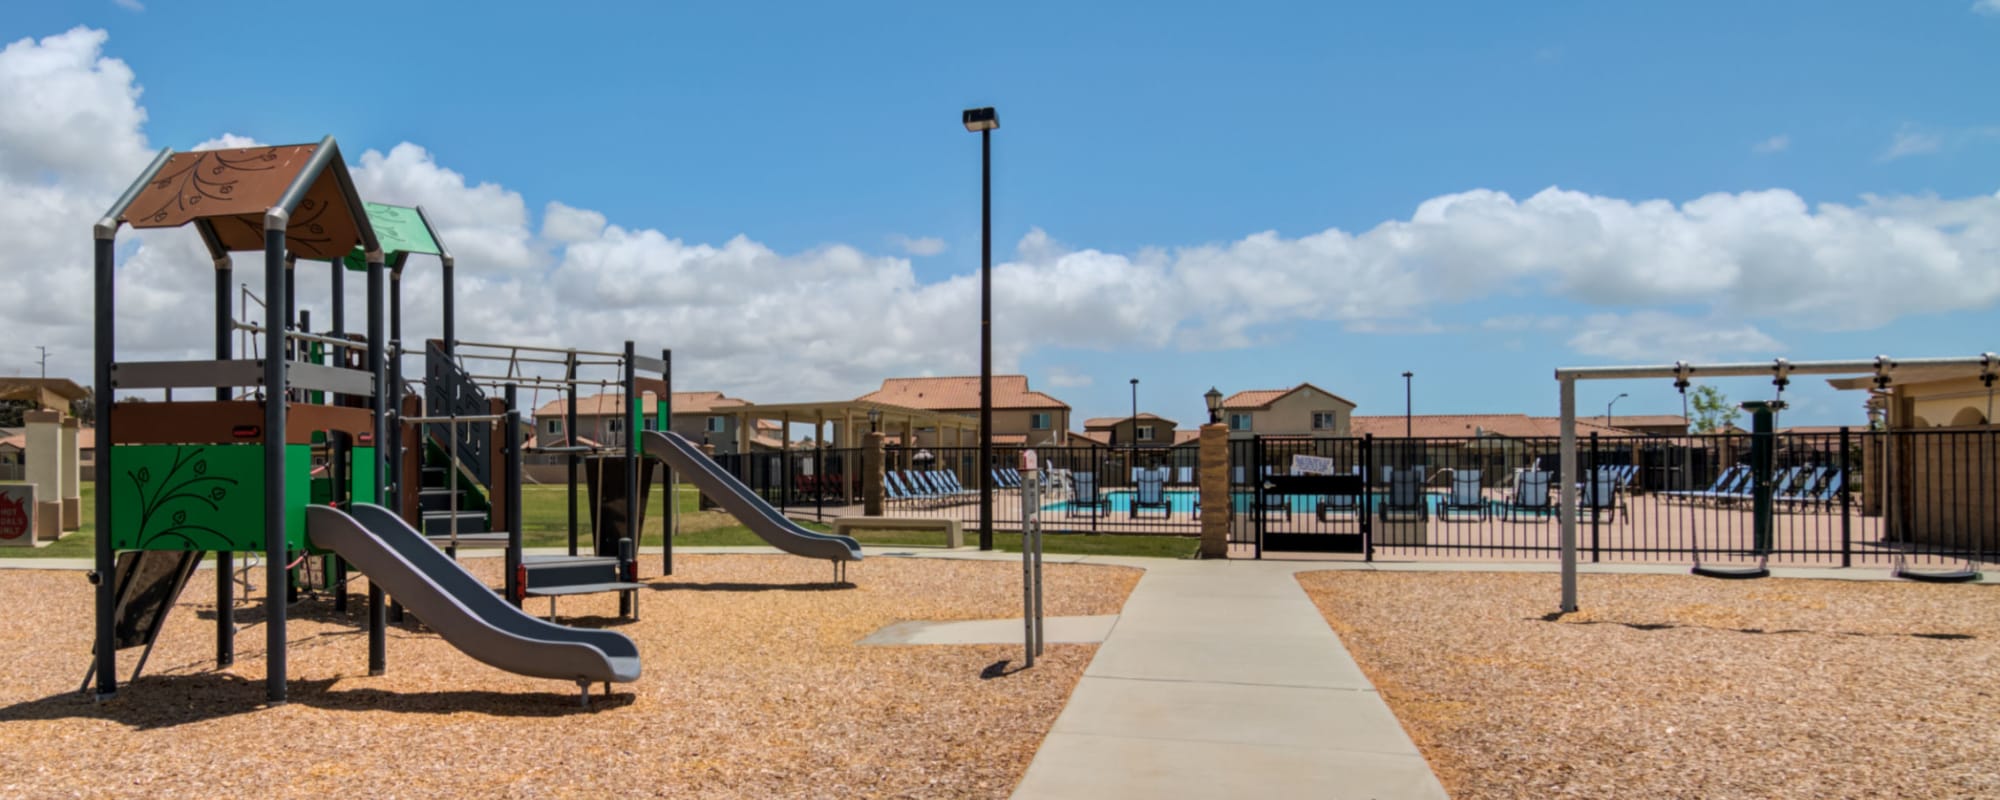 A playground near Harborview in Oceanside, California